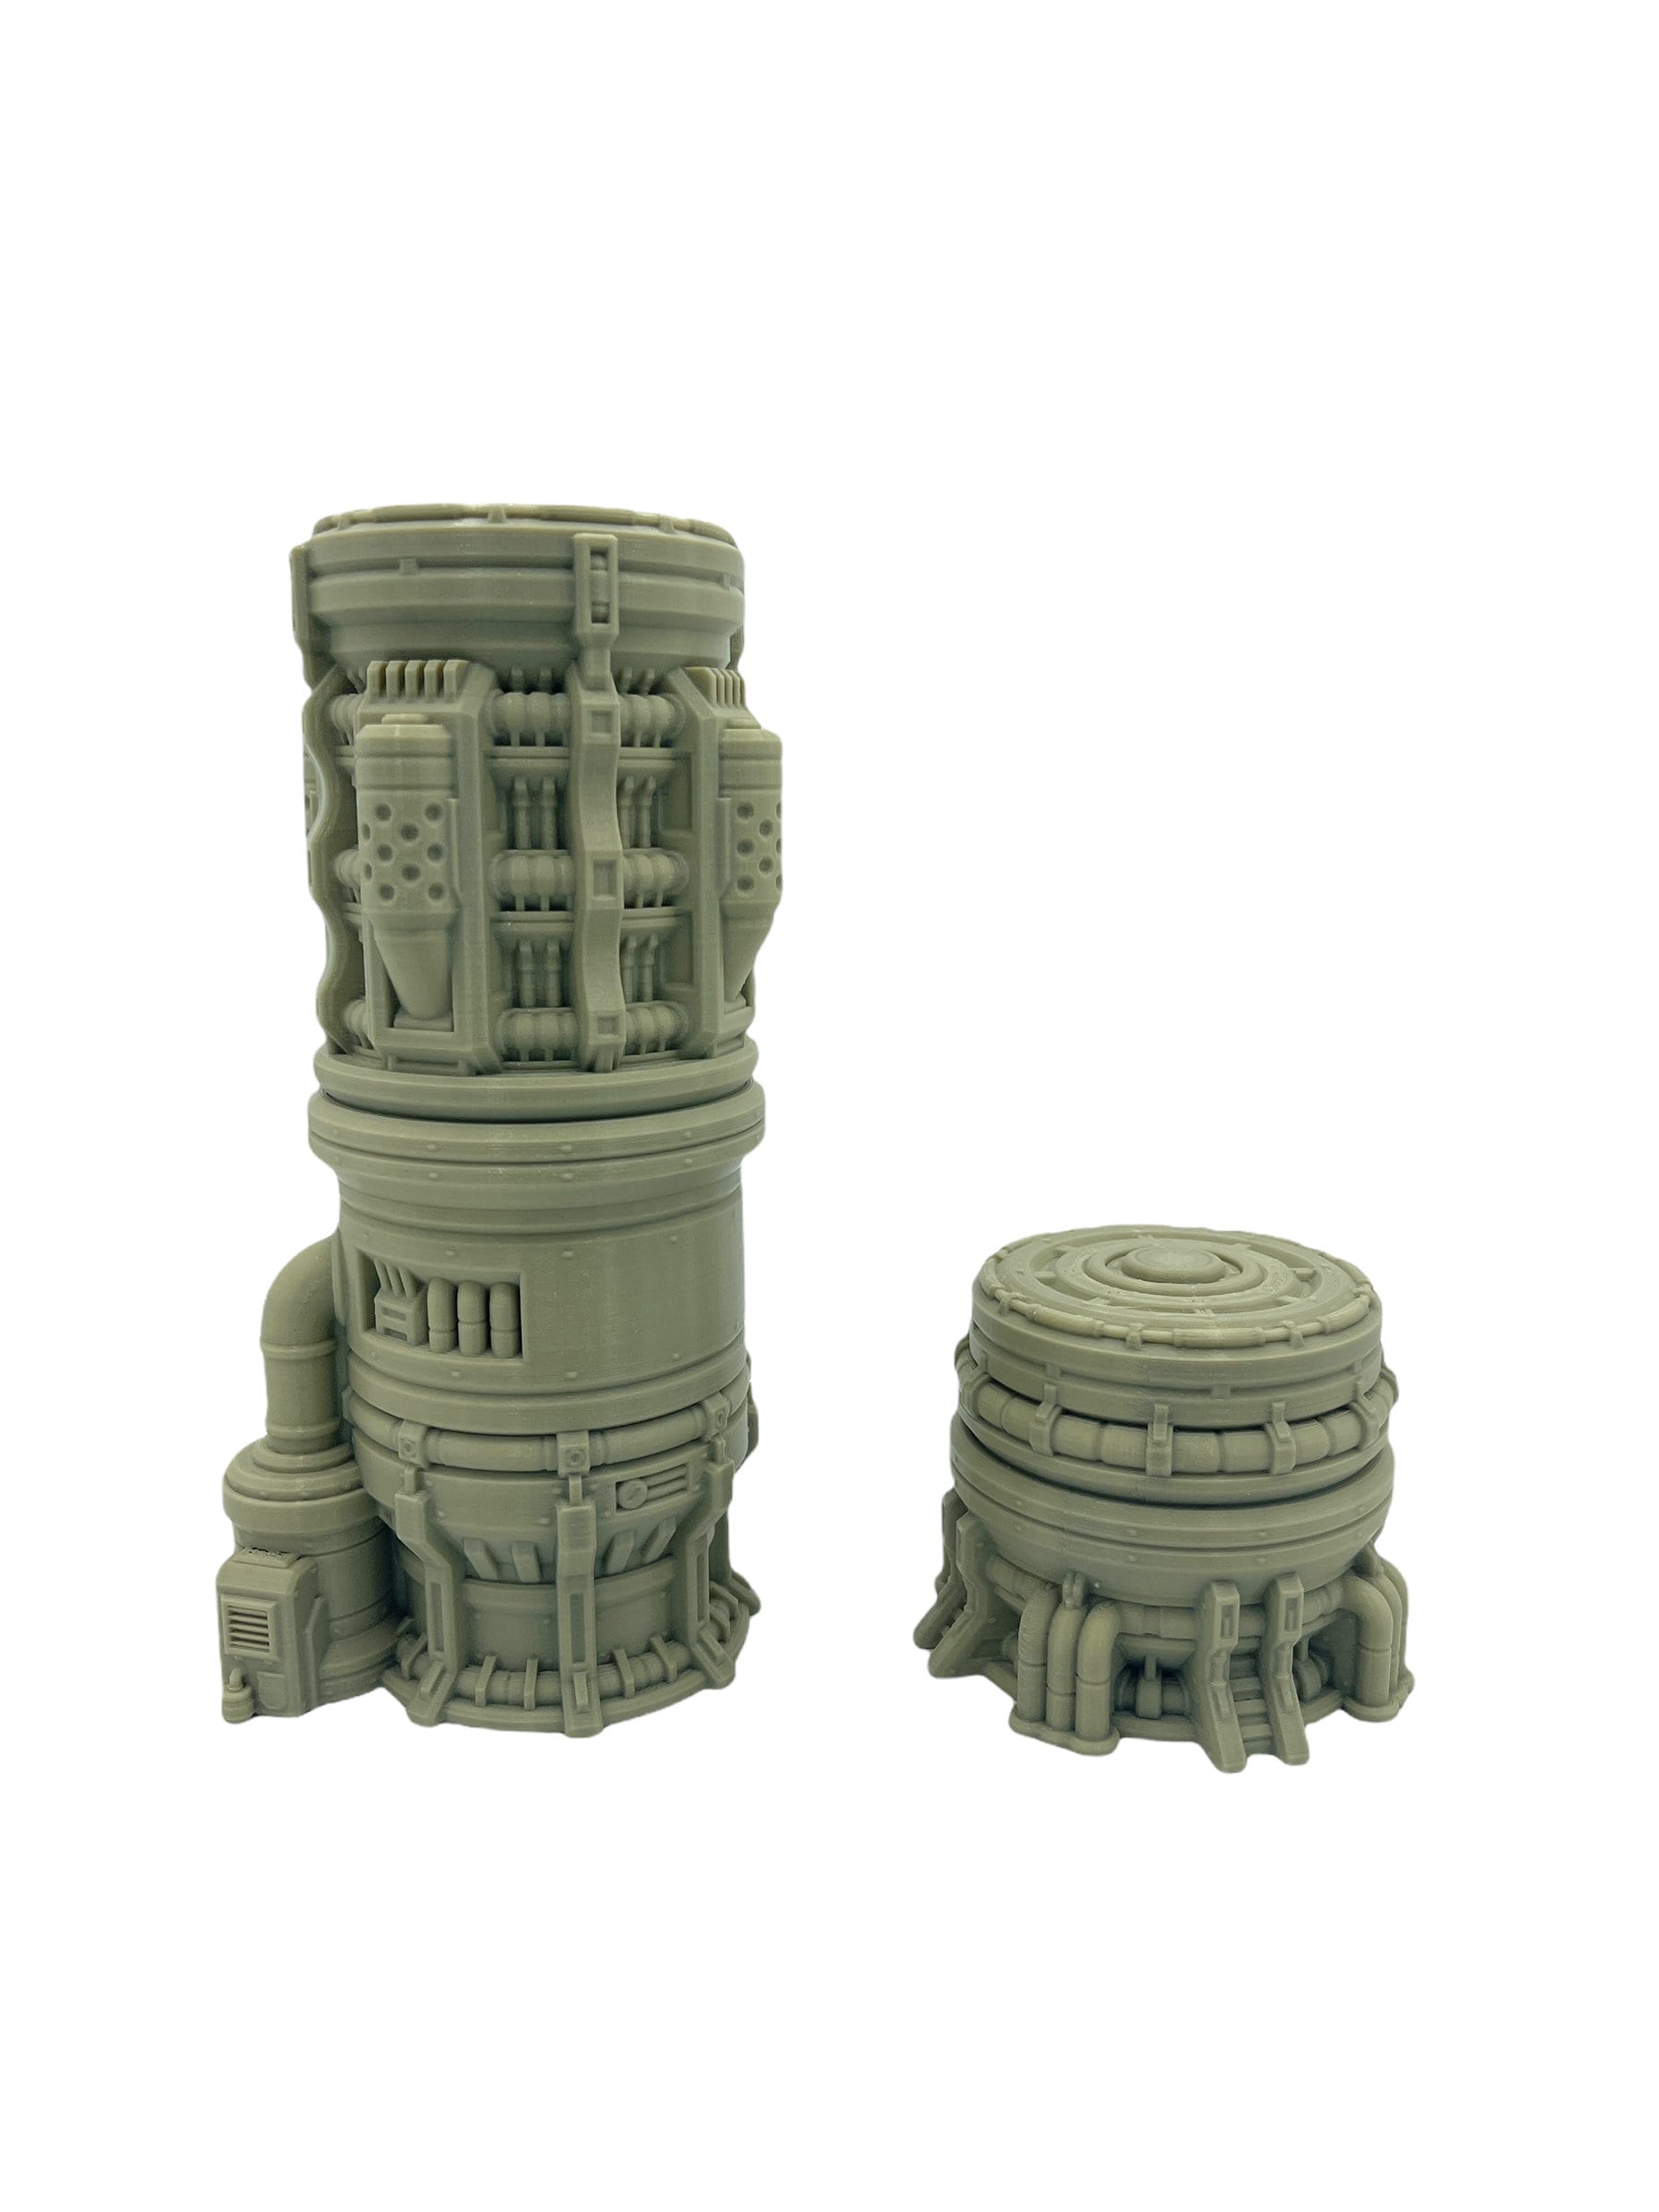 Outpost 21 - Gas Silos Scatter Pack / Forbidden Prints / RPG and Wargame 3d Printed Tabletop Terrain / Licensed Printer